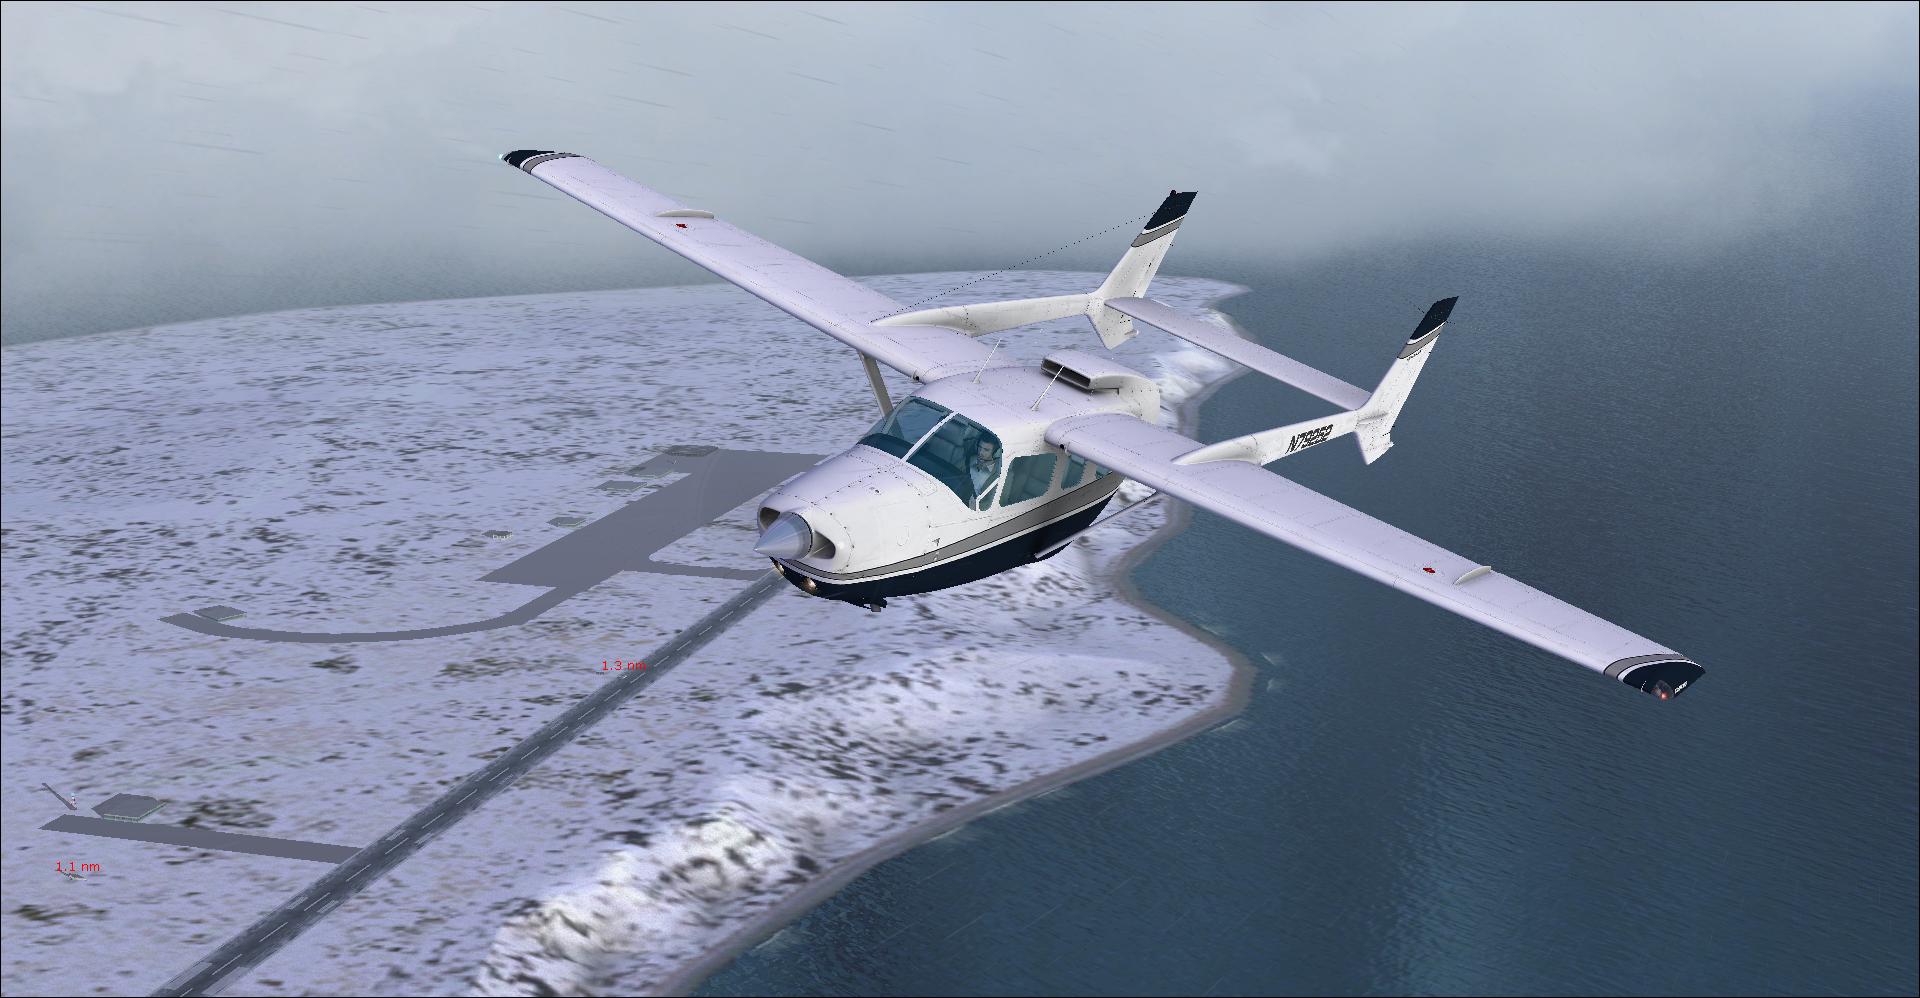 Departing from Eareckson Air Station (PASY) on the last leg of the journey